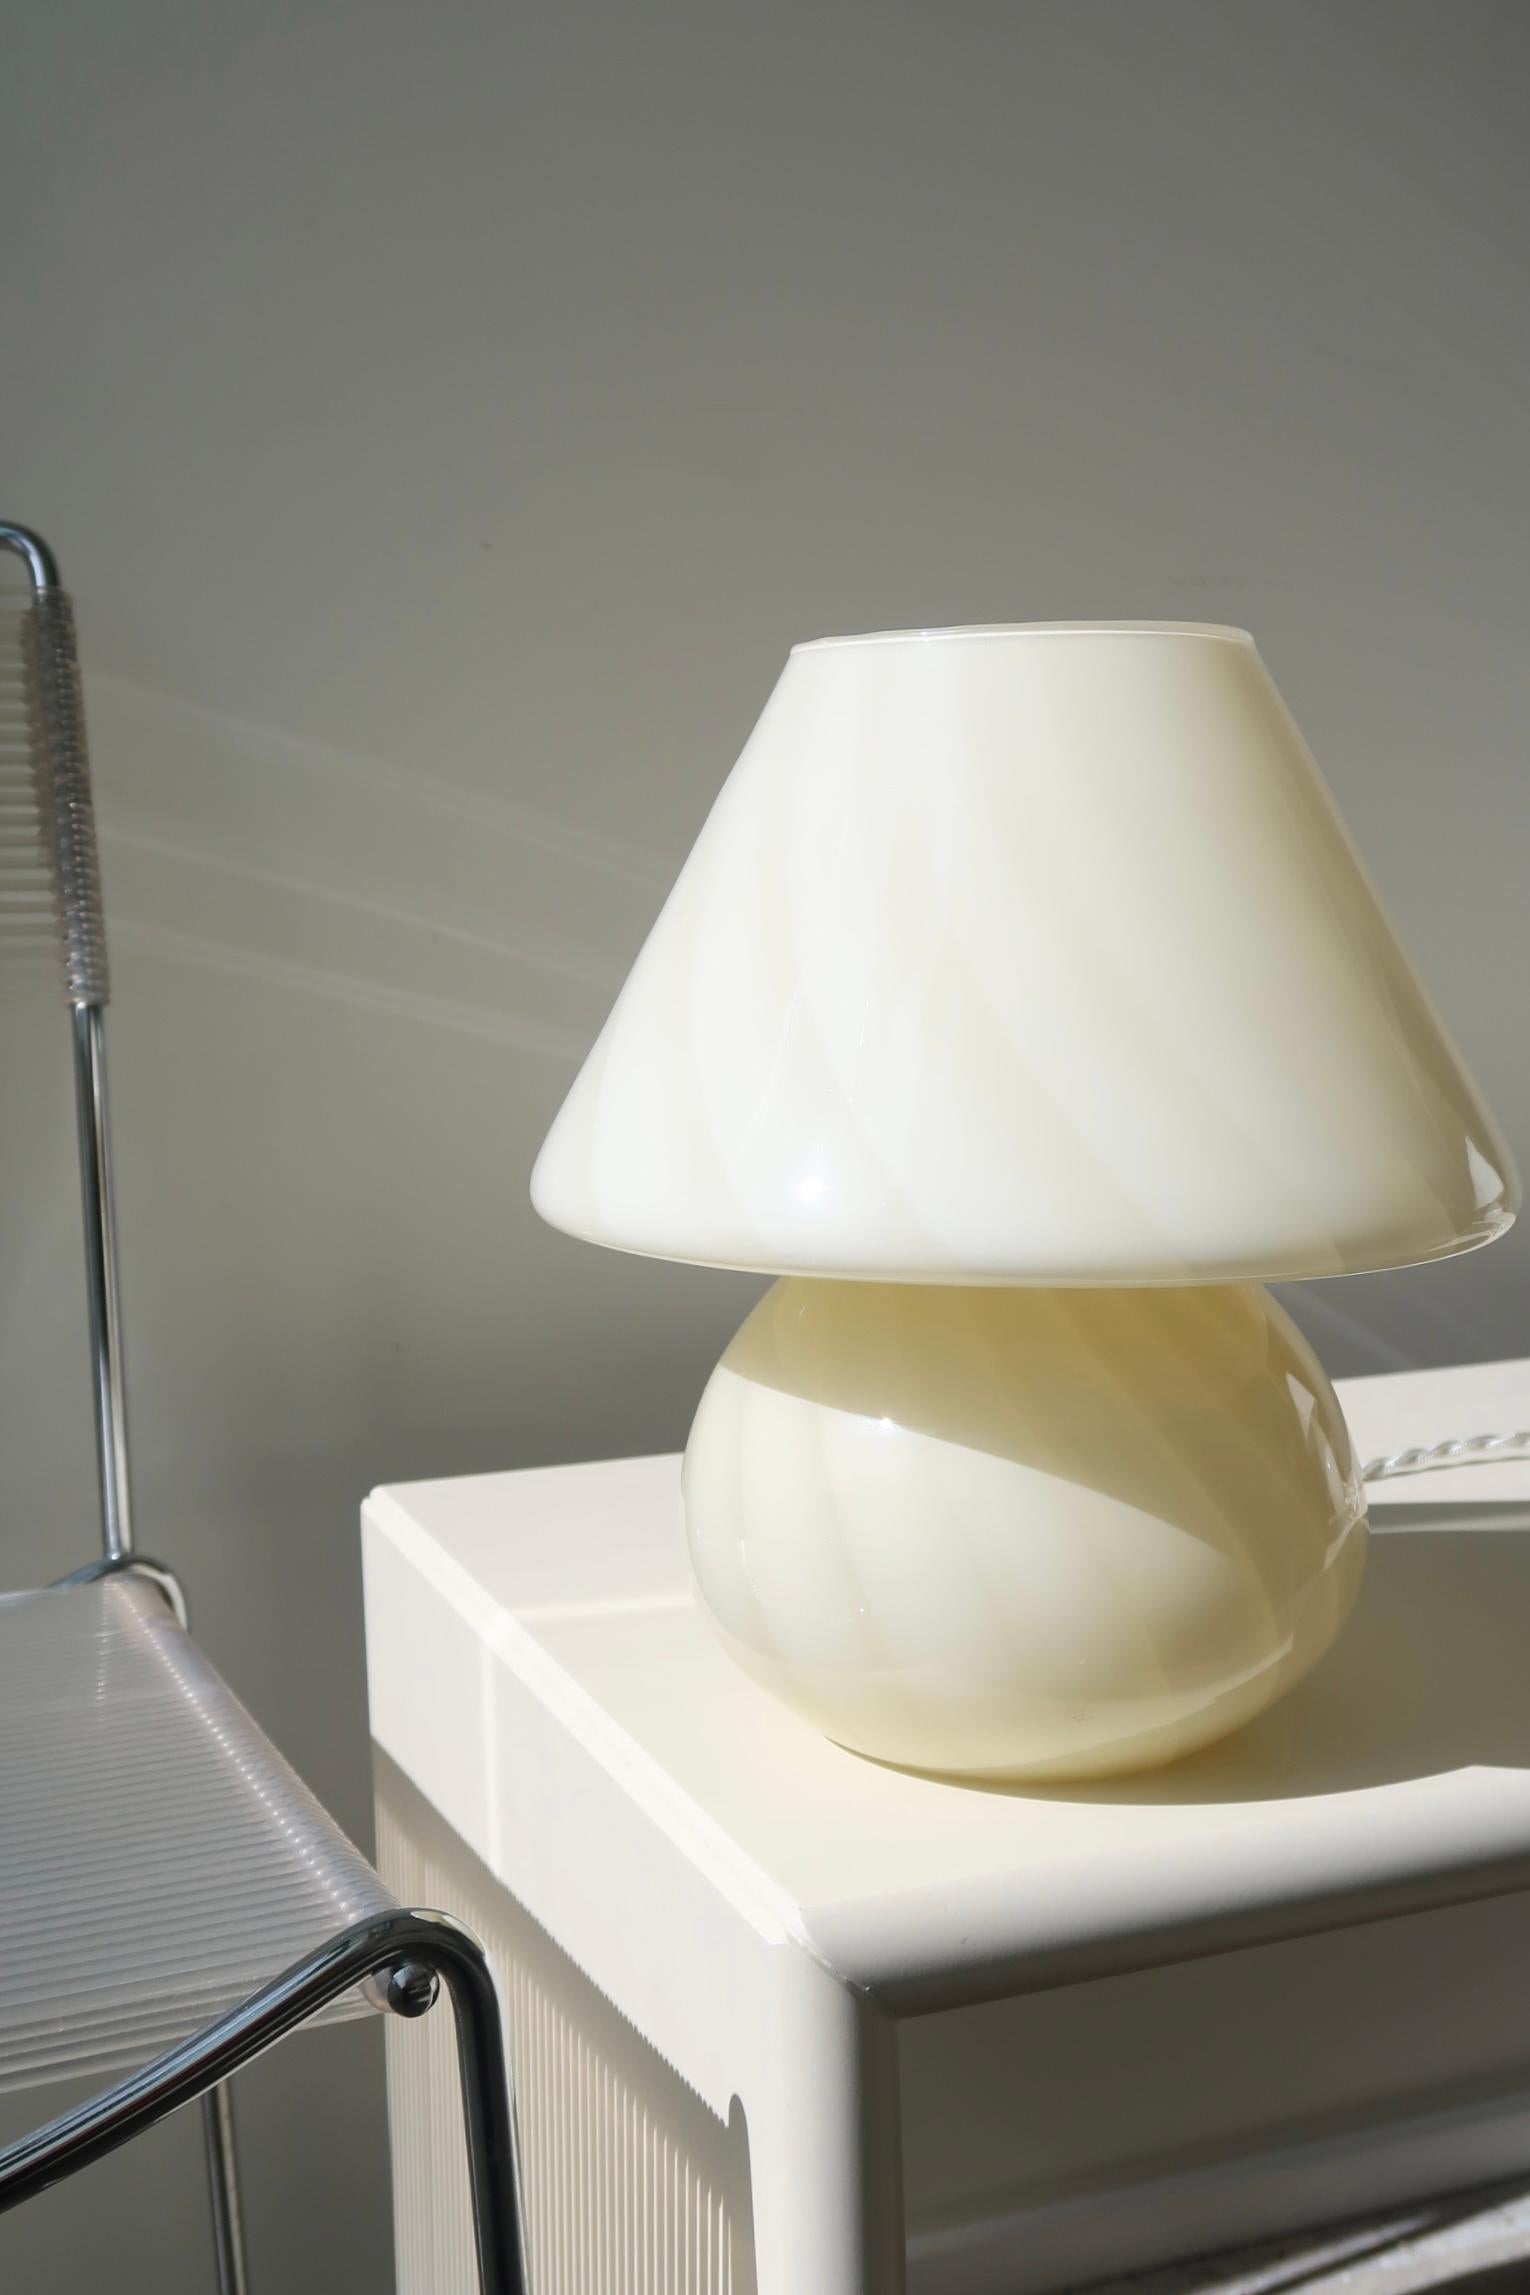 Vintage medium Murano mushroom table lamp in a beautiful, delicate cream yellow shade. Mouth-blown in one piece of glass with a swirl pattern. Handmade in Italy, 1960/70s, and comes with new white cord. 
H: 27 cm D: 24 cm.

